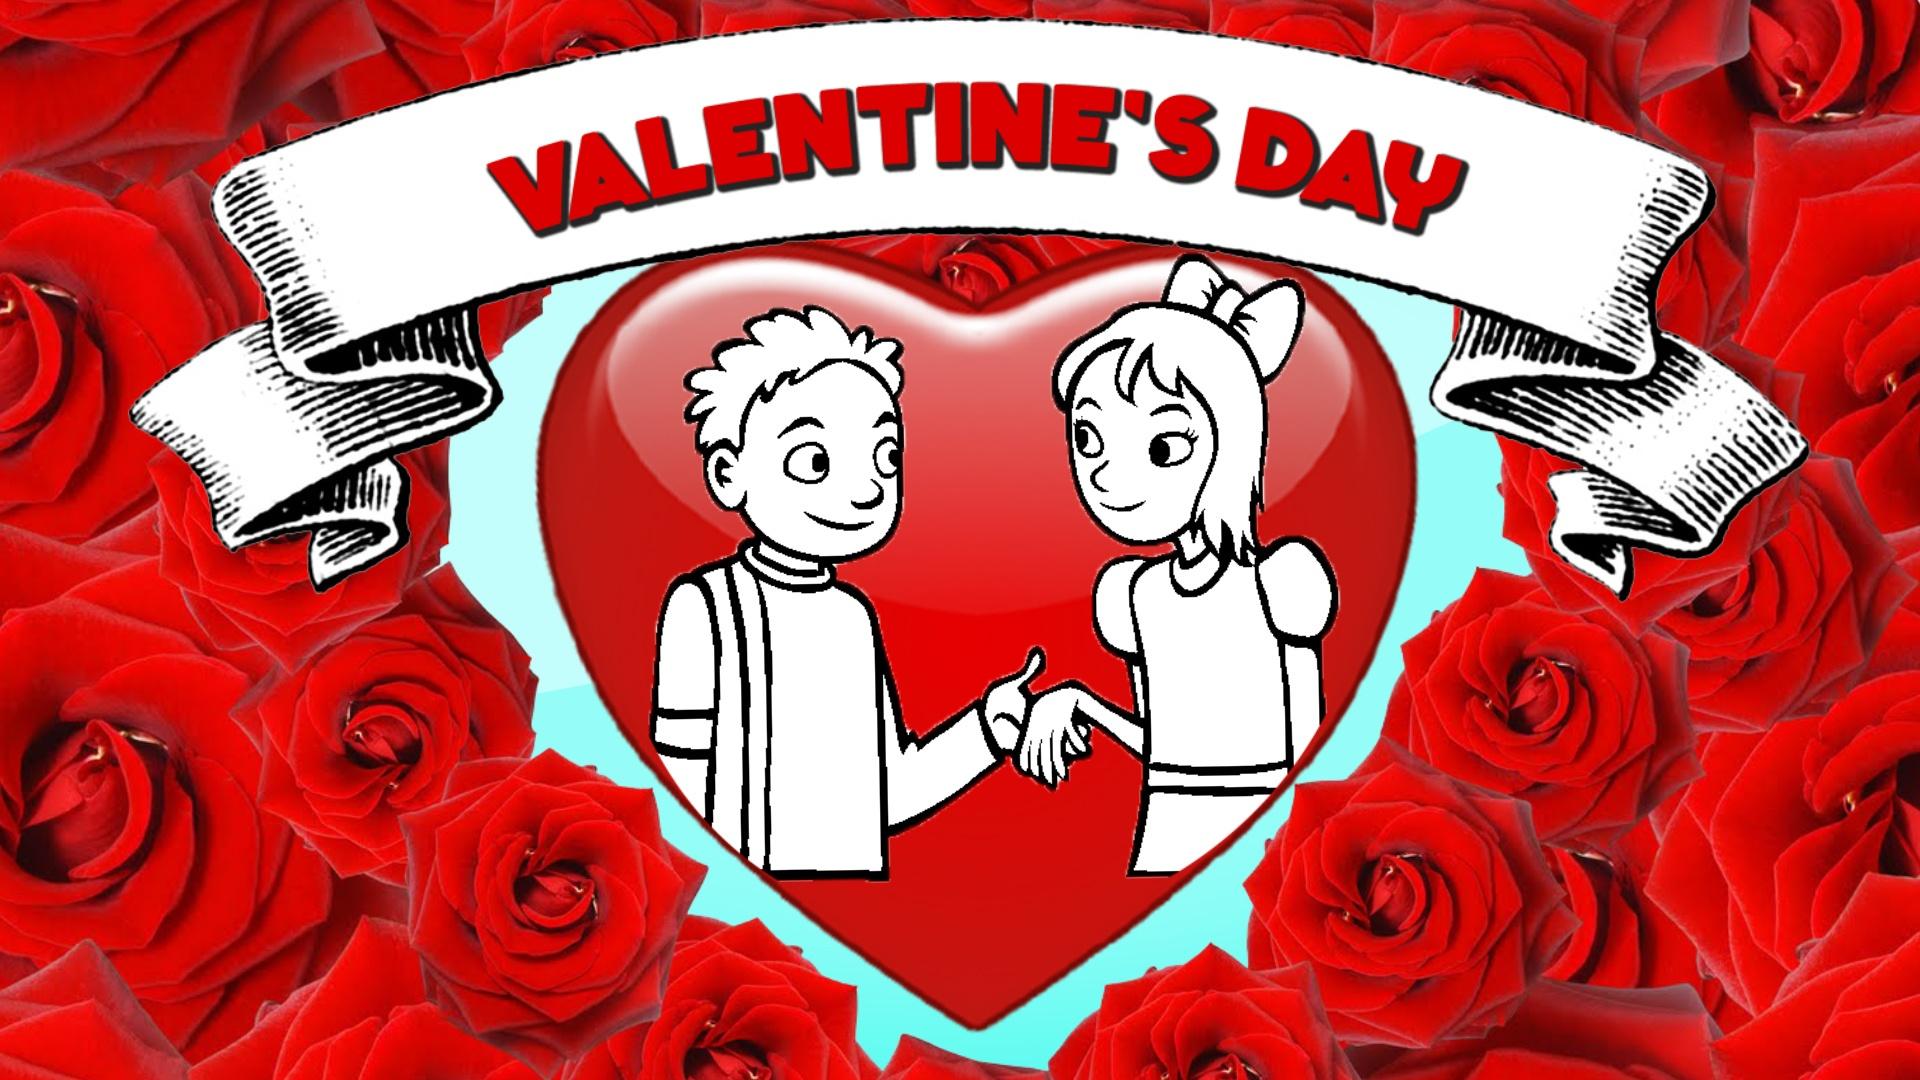 Valentine's Day : Valentines Day wishes, quotes, greetings, status, Images